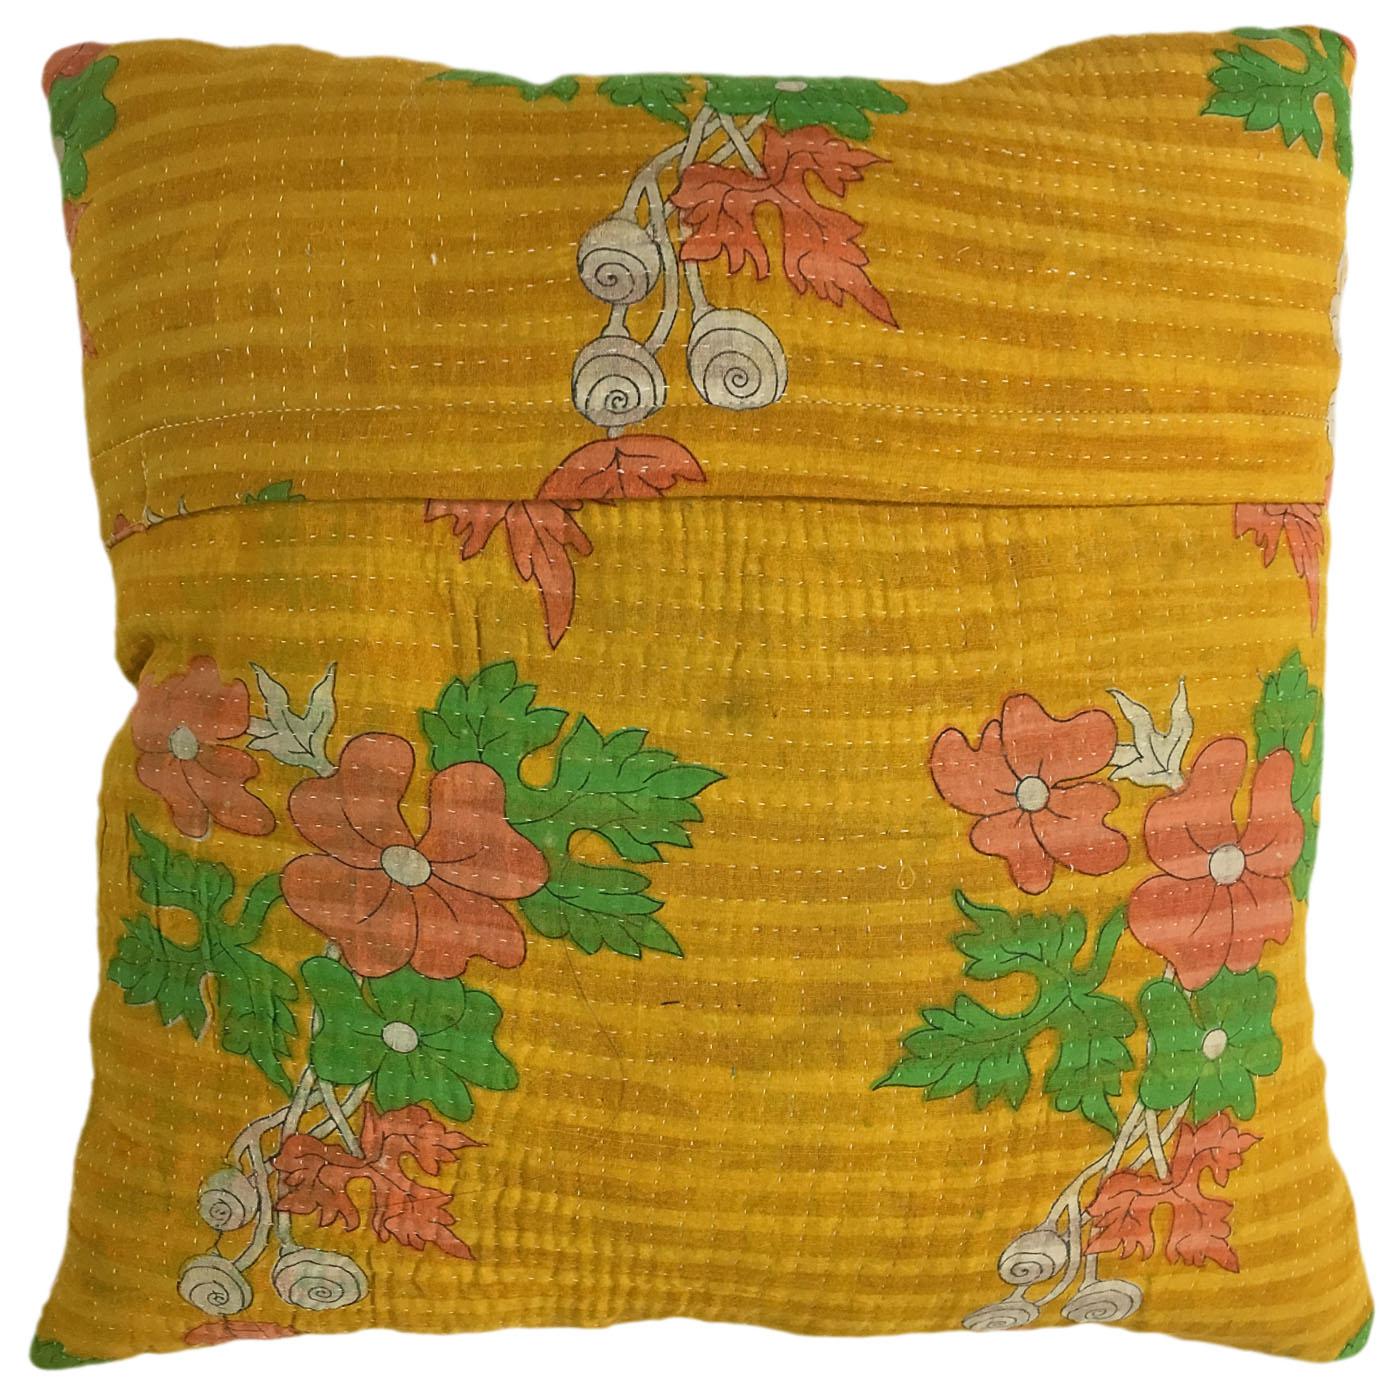 Cushion Embroidered Cotton Handmade Cover Pillow Indian Kantha Patchwork Throw